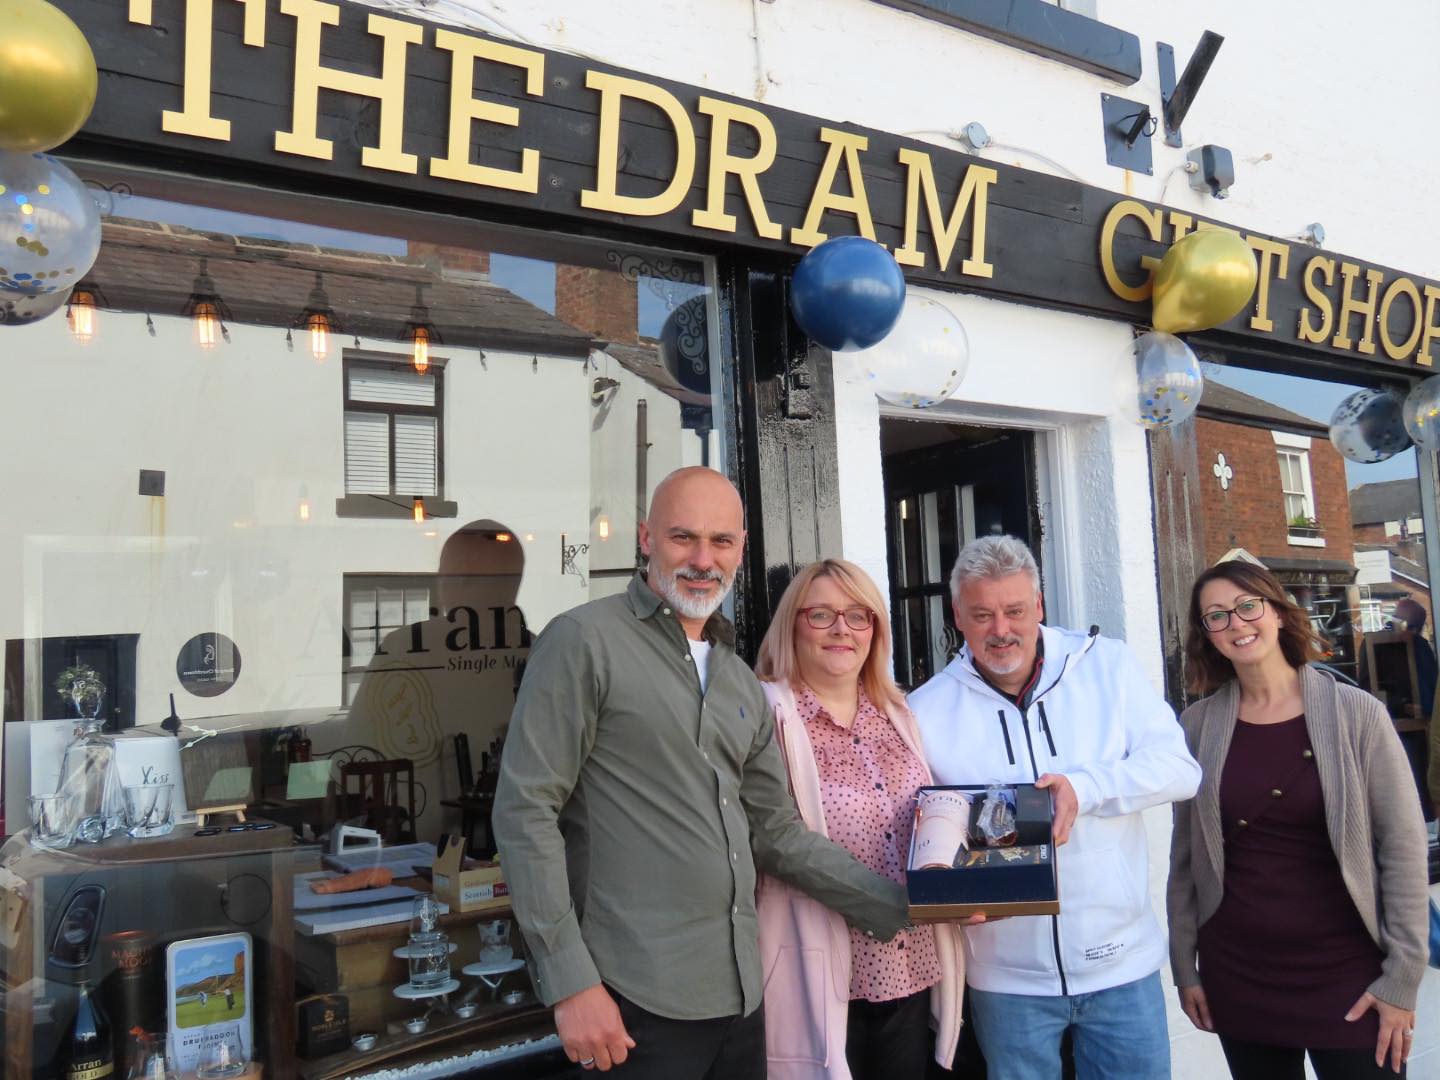 Darren and Rebecca Boyd-Preece with Linda and Paul Kewin, who won first prize in a Sandgrounder Radio competition, at The Dram Gift Shop in Churchtown in Southport. They won a special ten year old bottle of Arran Whisky and a selection of gifts worth £175 - a great way for Paul to celebrate his birthday. Photo by Andrew Brown Media